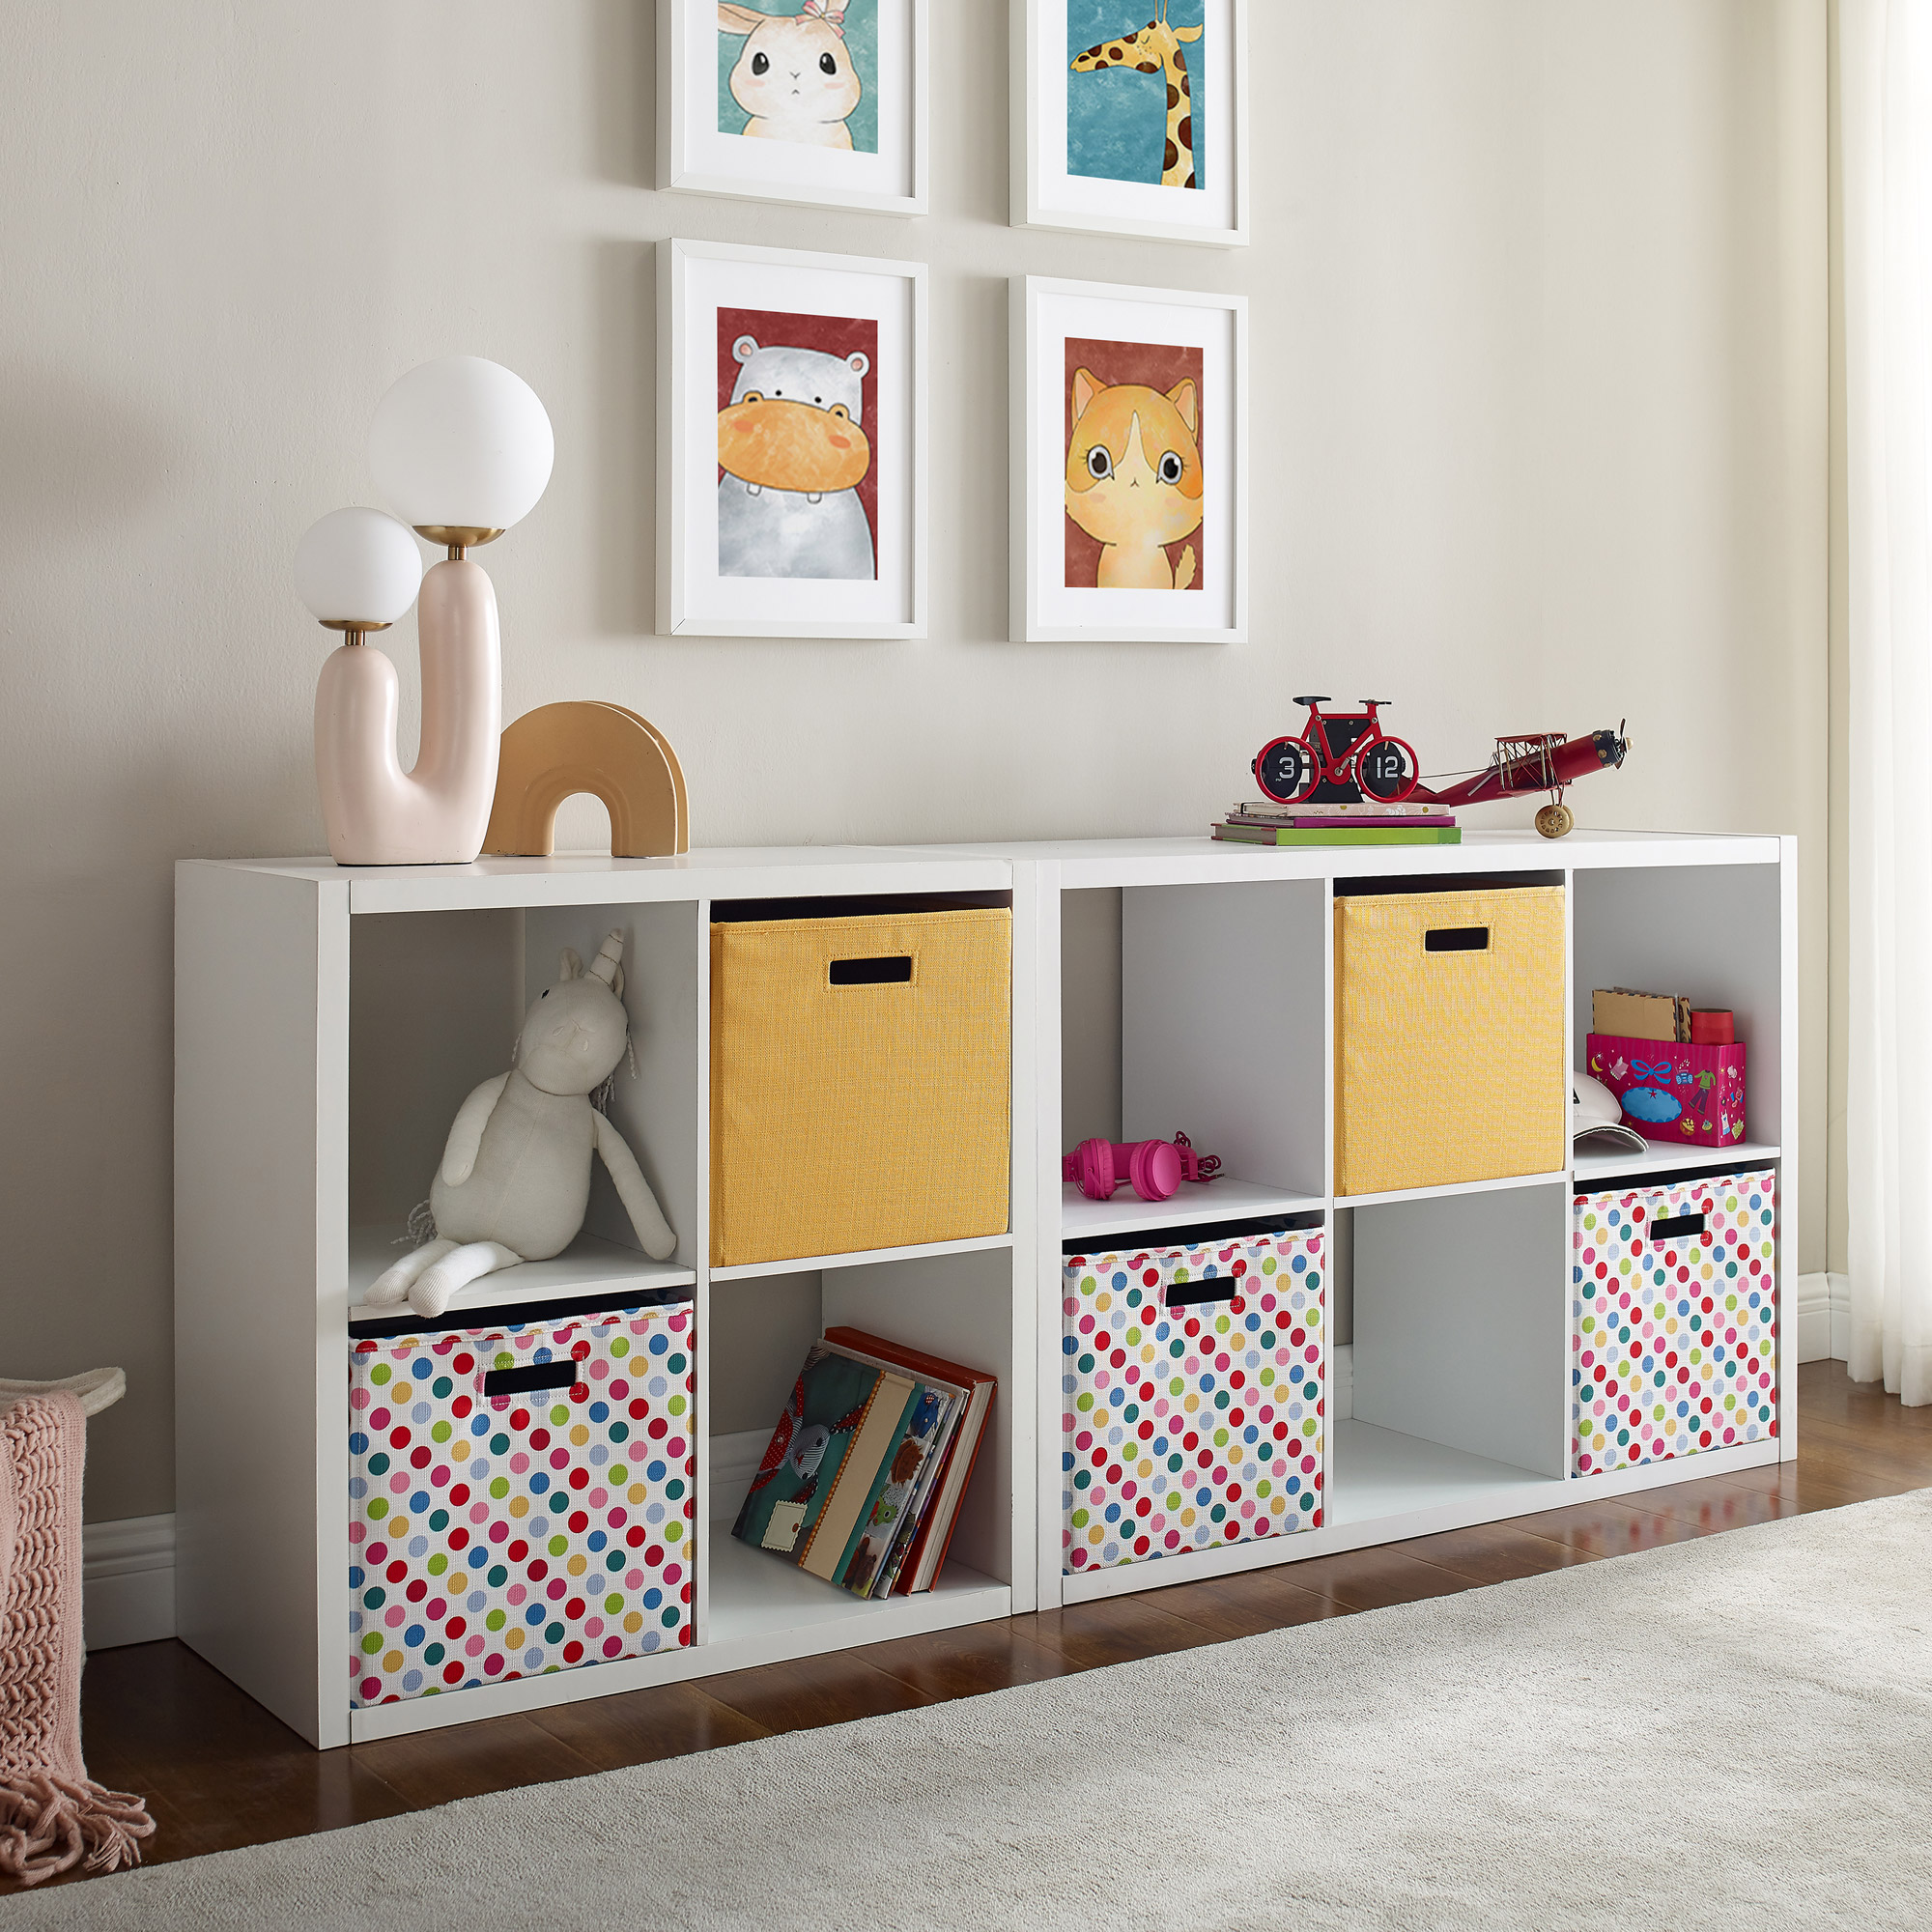 Galli 6 Cubby Storage Cabinet White by Linon